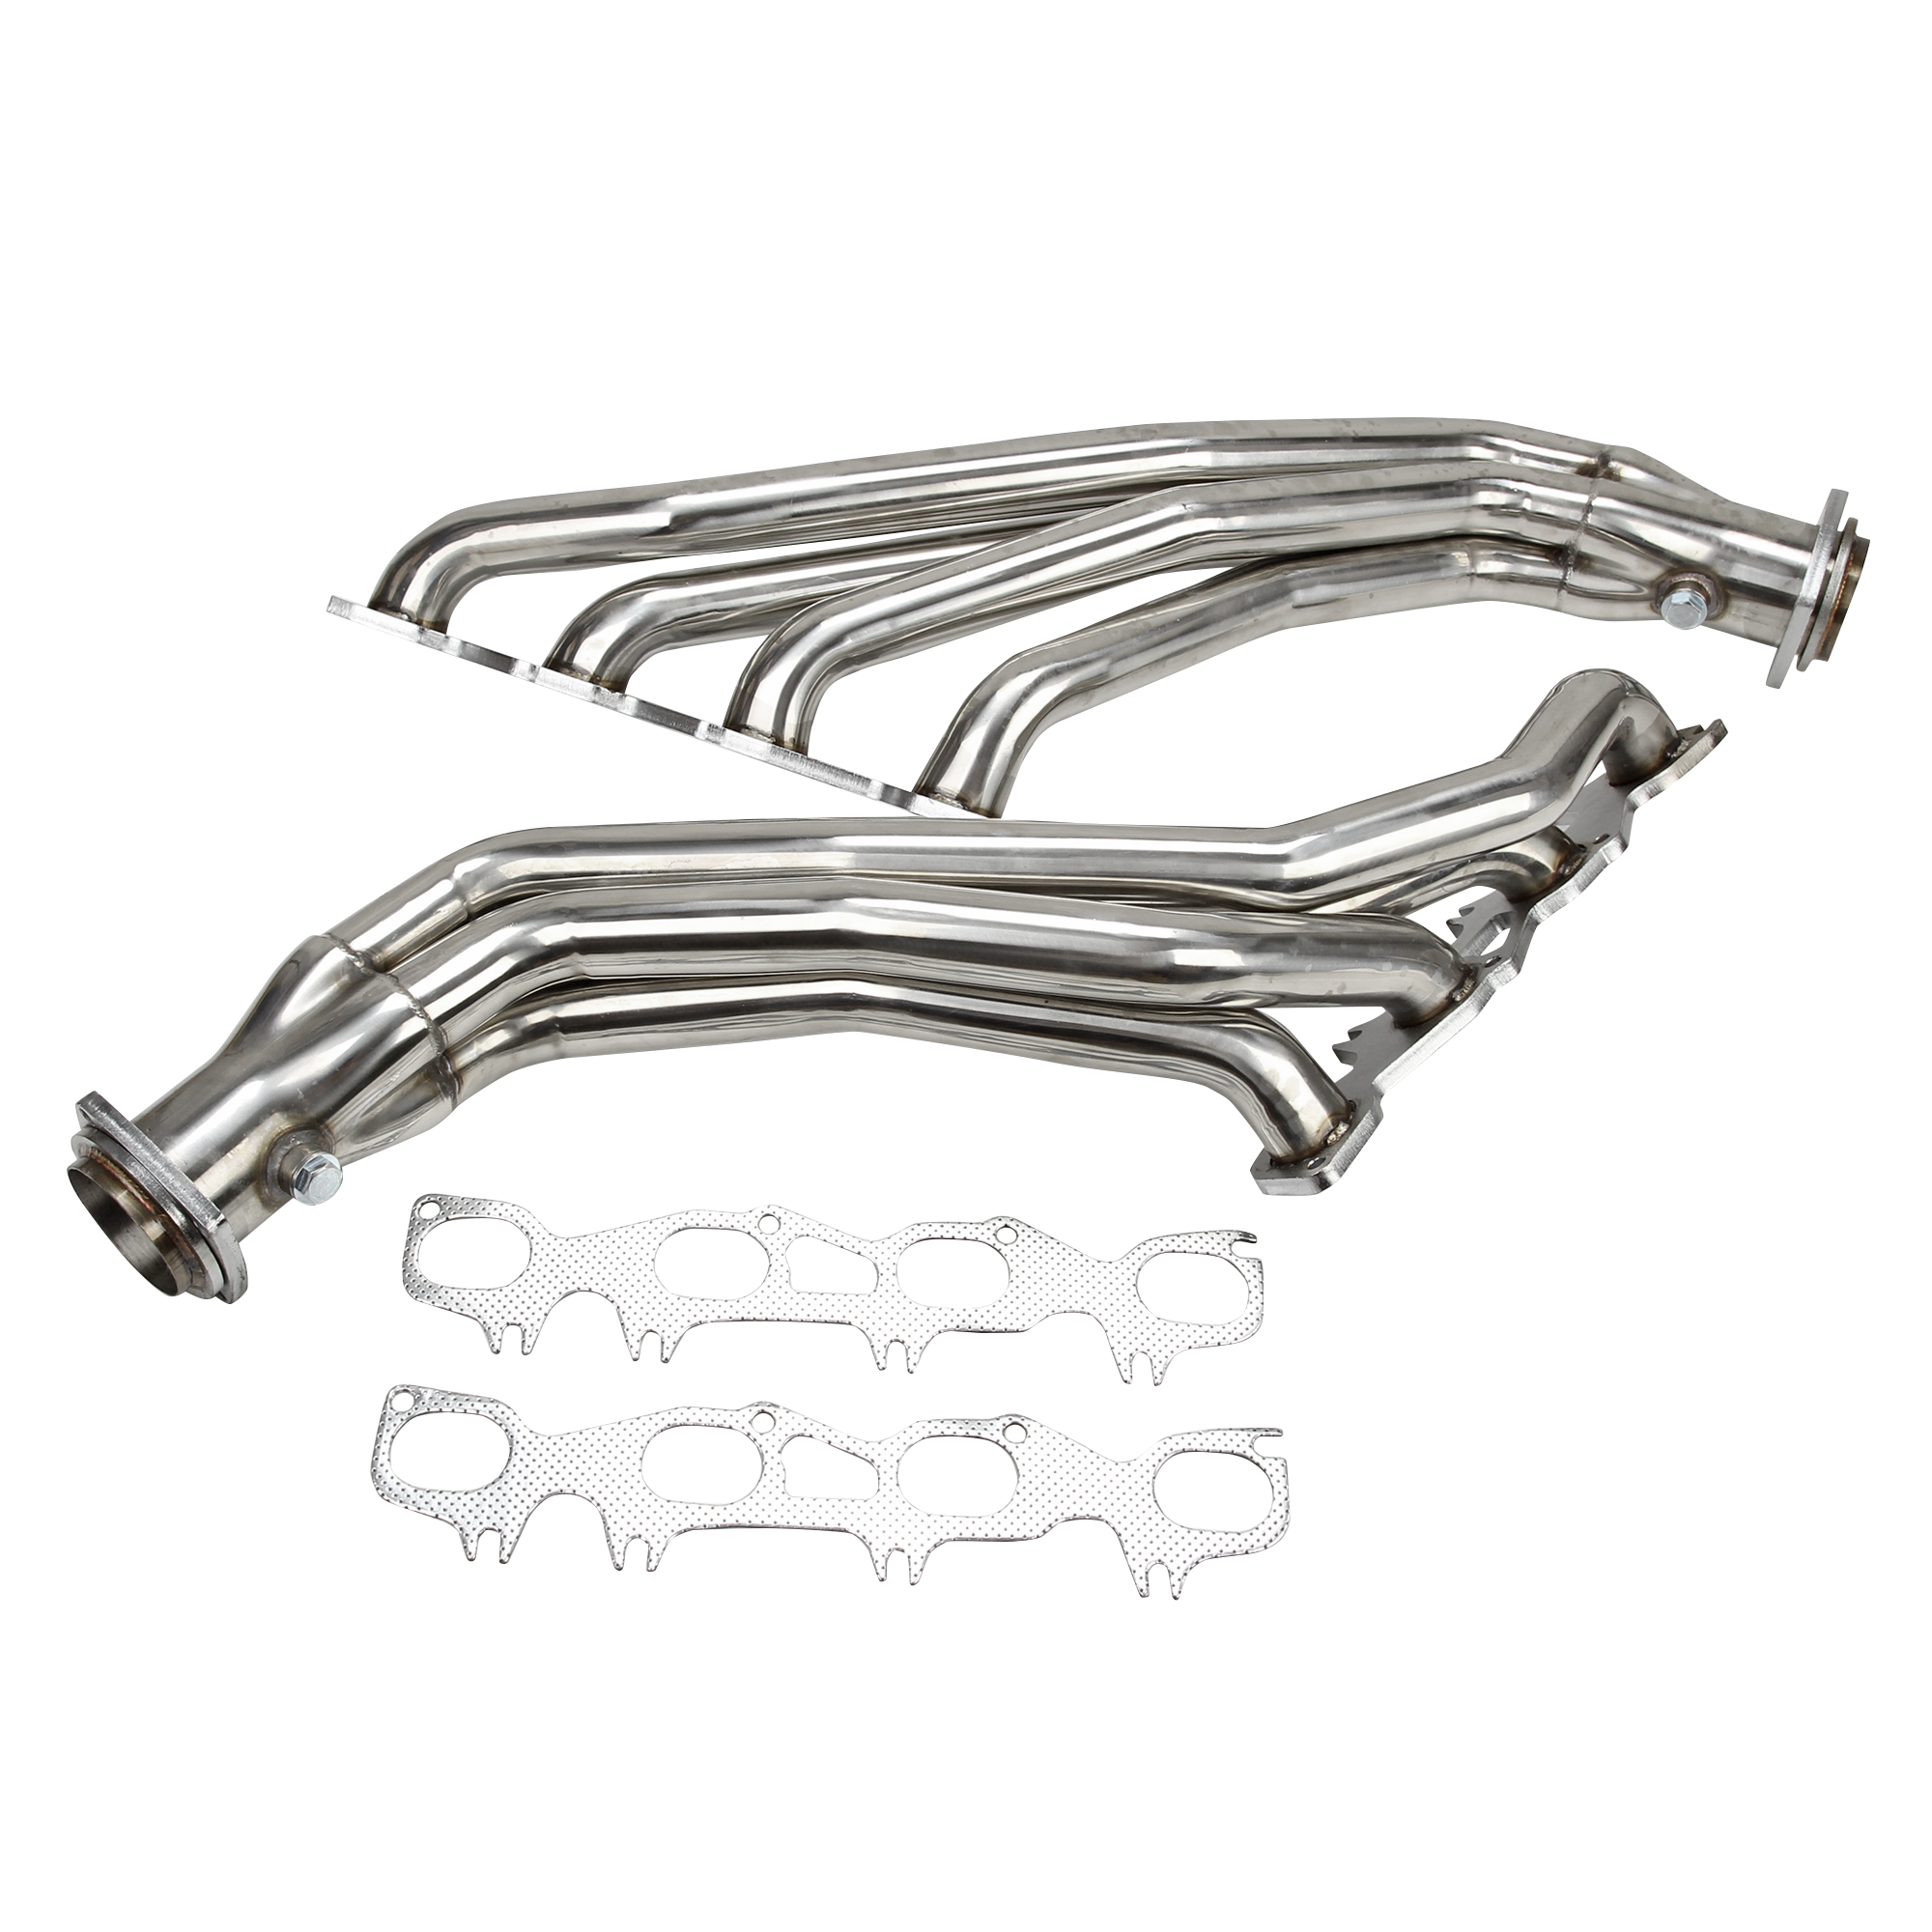 Exhaust Manifold Headers for 2008-2010 Dodge Challenger 5.7L